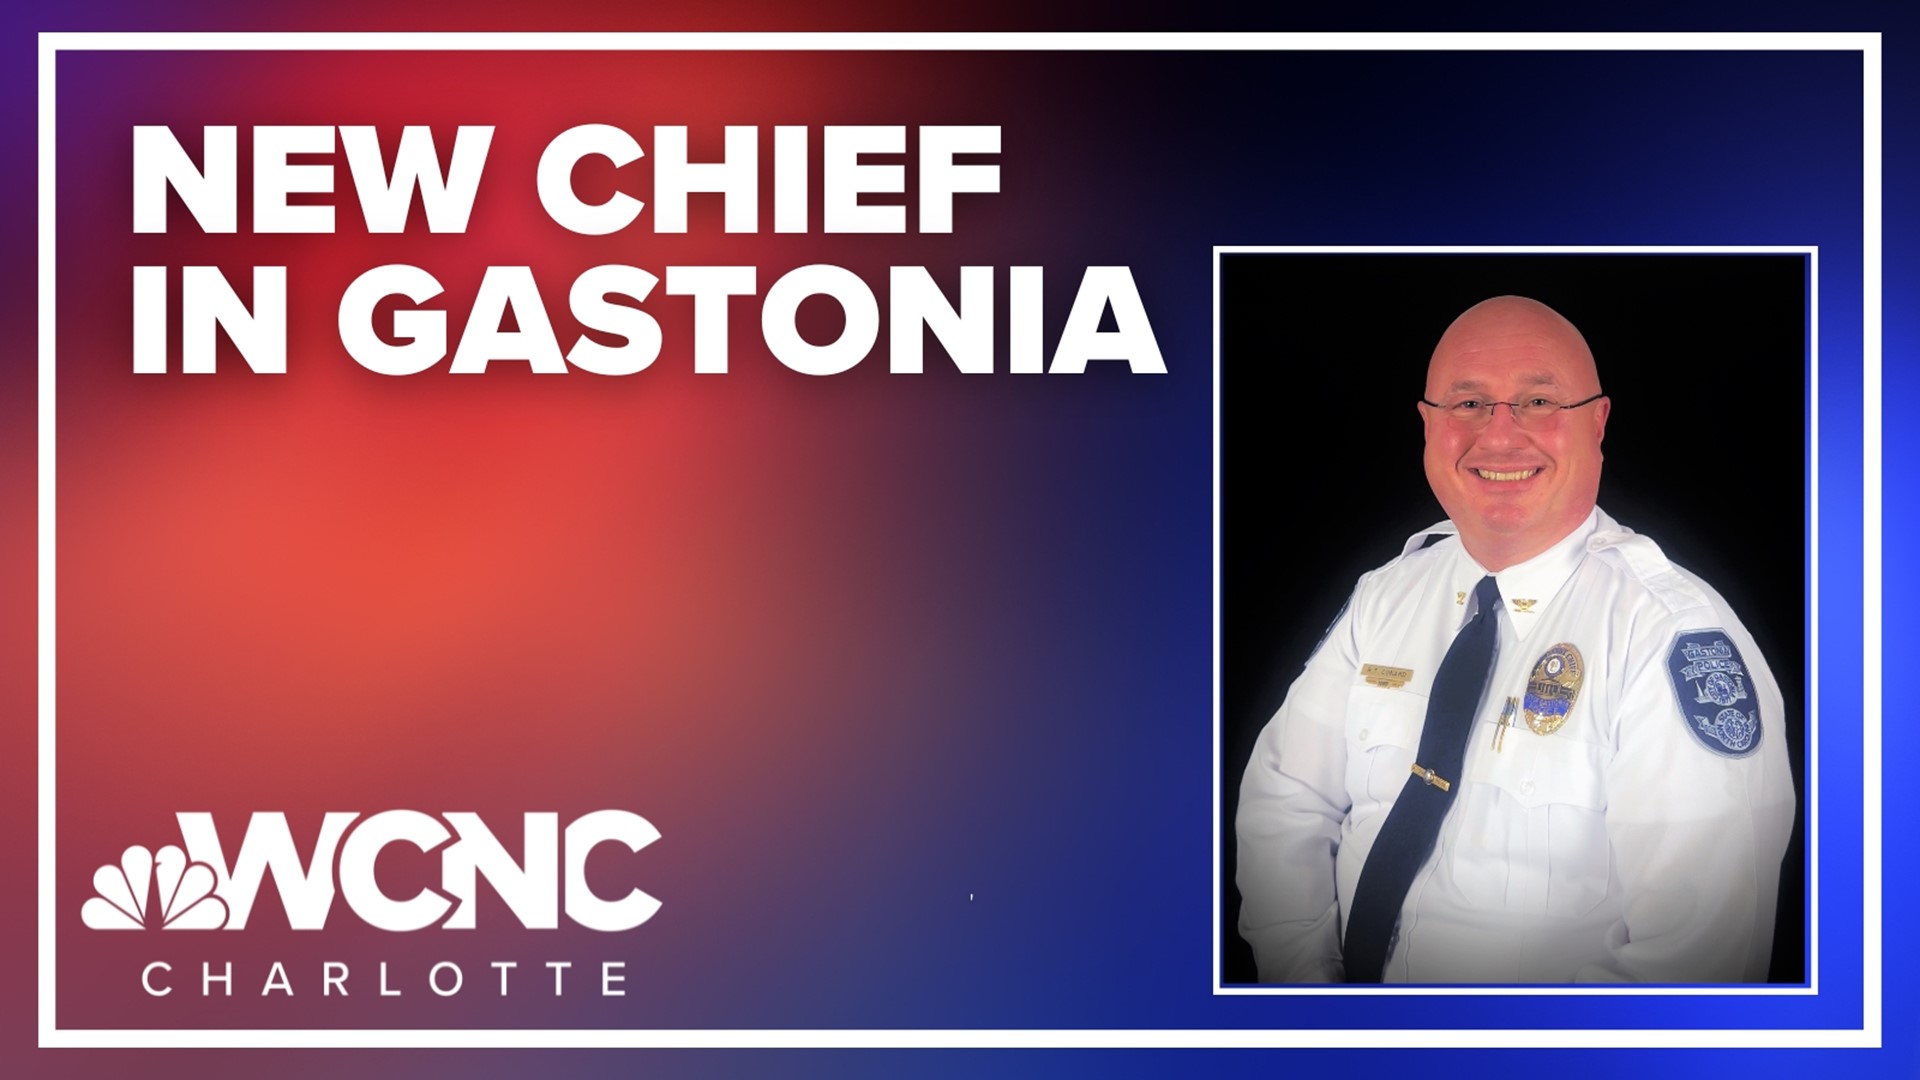 Gastonia has a new police chief, and they didn't have to look very far!